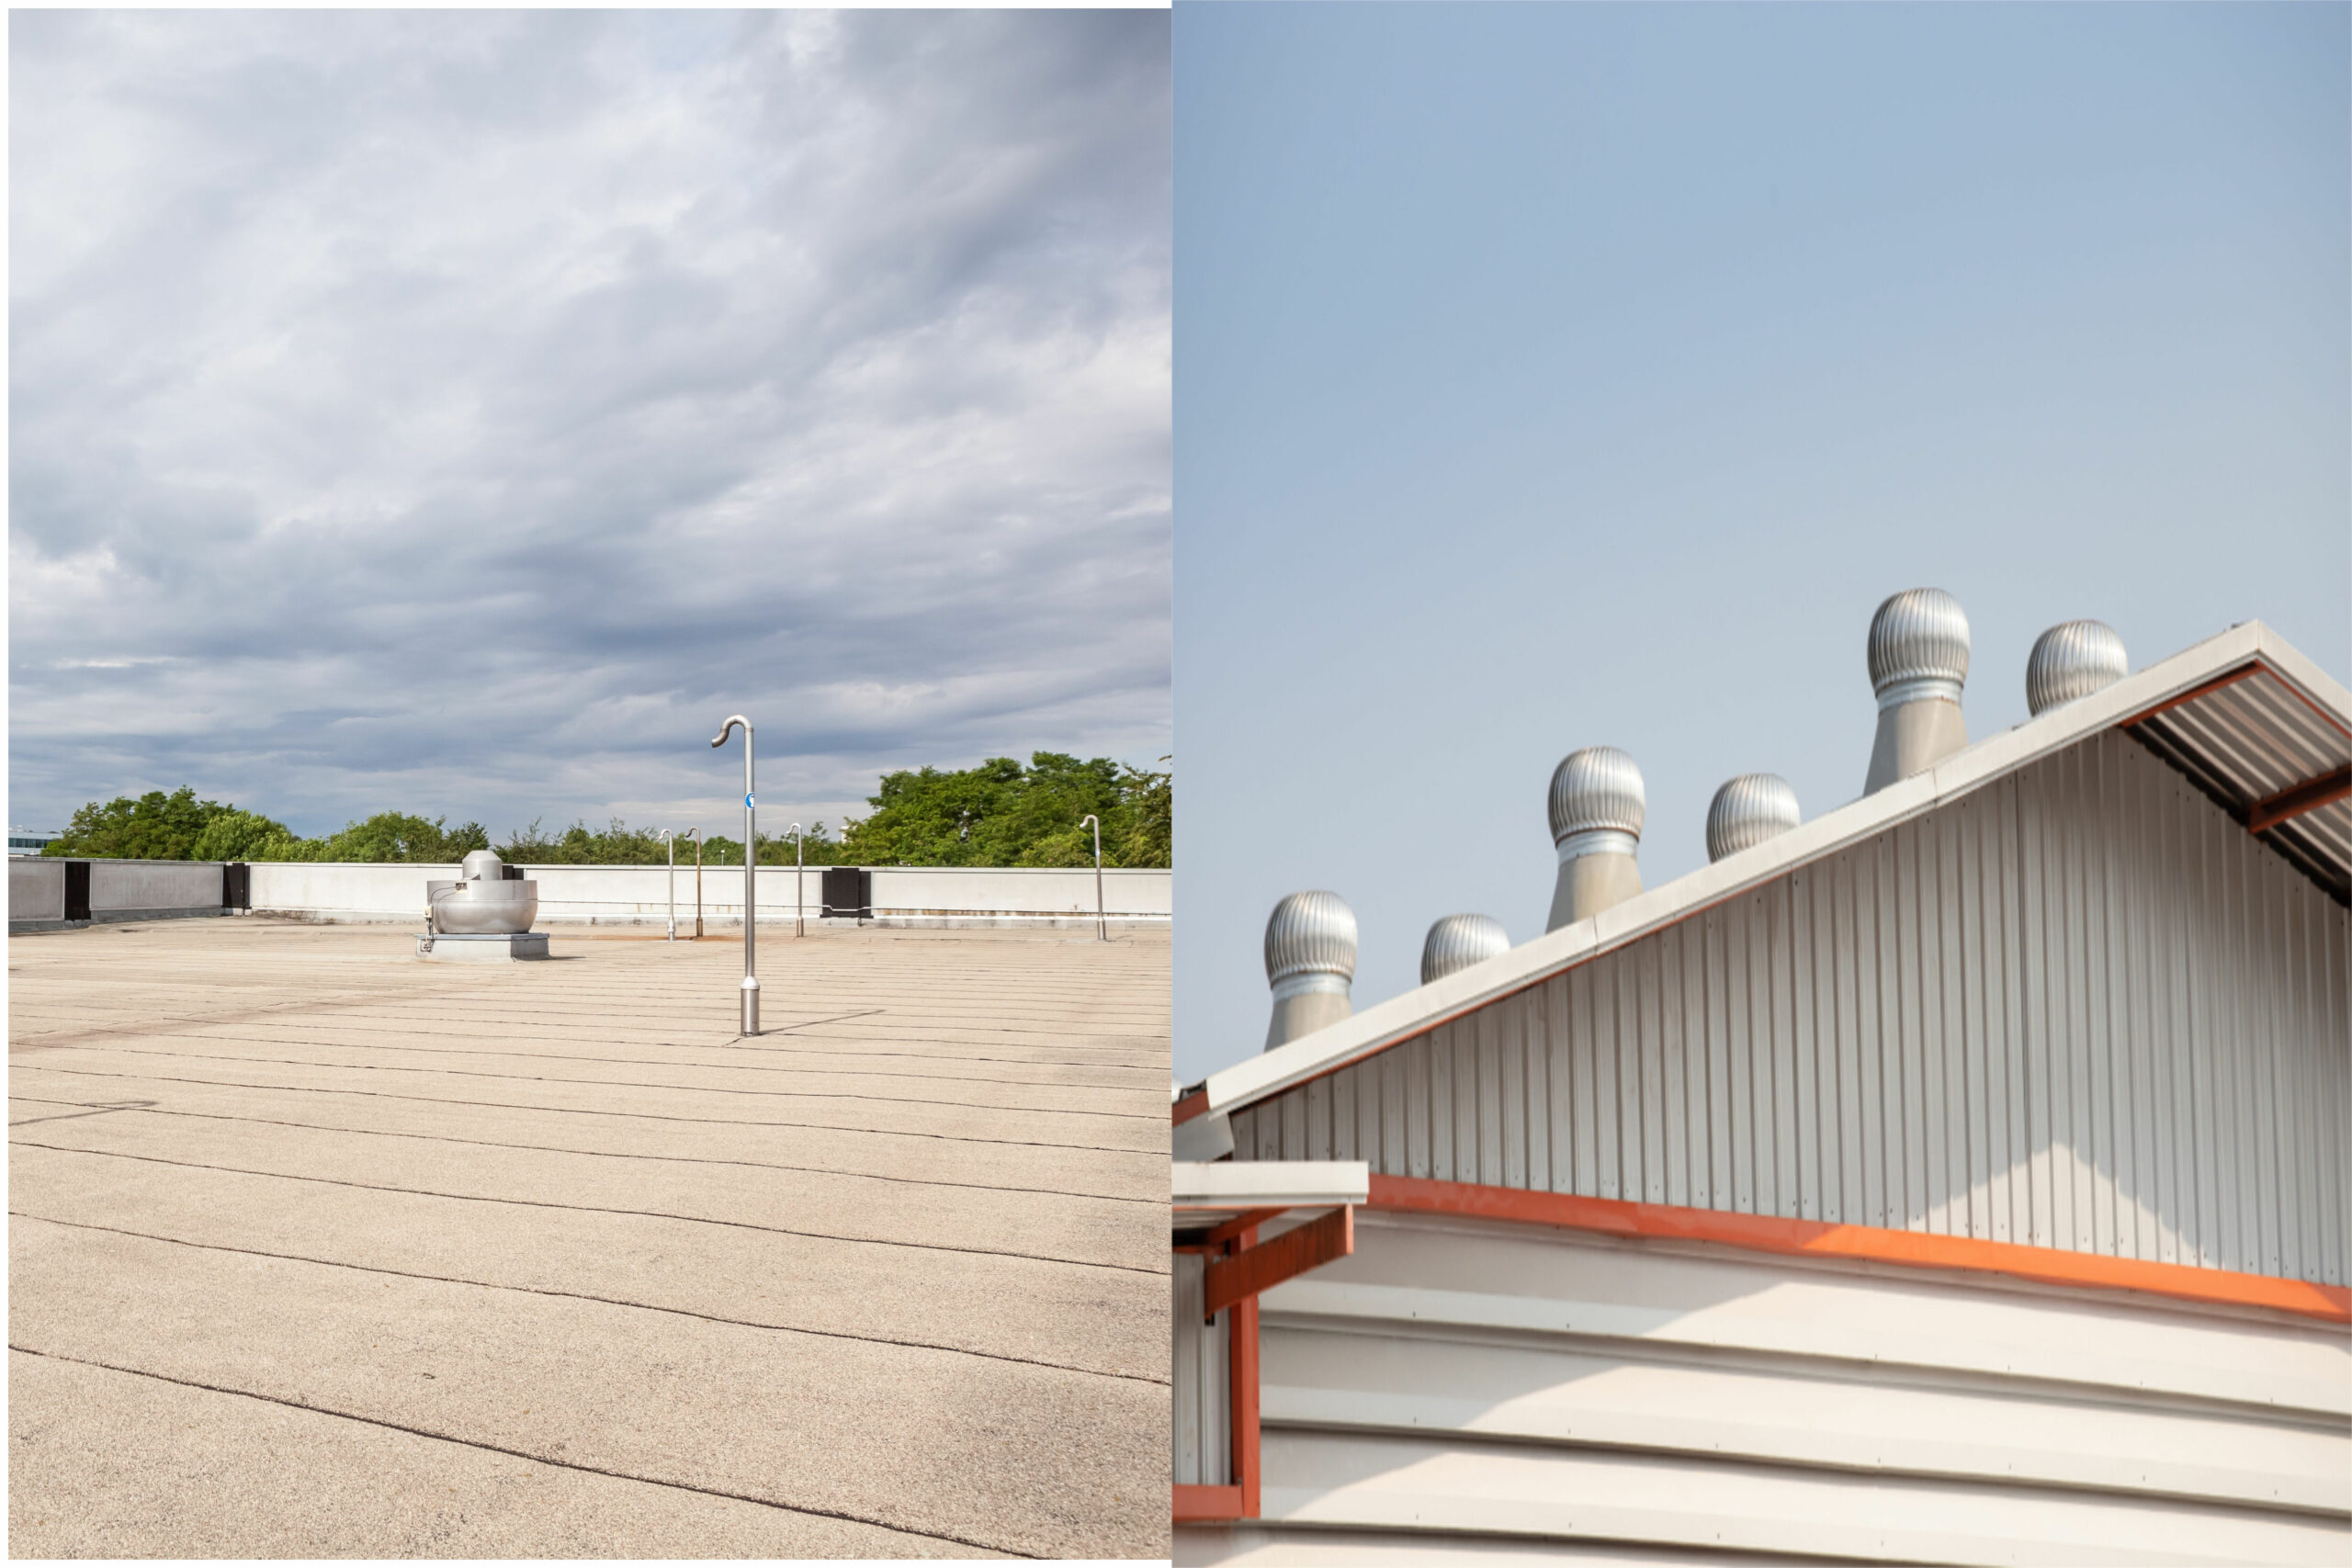 FLAT ROOF VS PITCHED ROOF: WHICH IS BETTER FOR COMMERCIAL BUILDINGS?